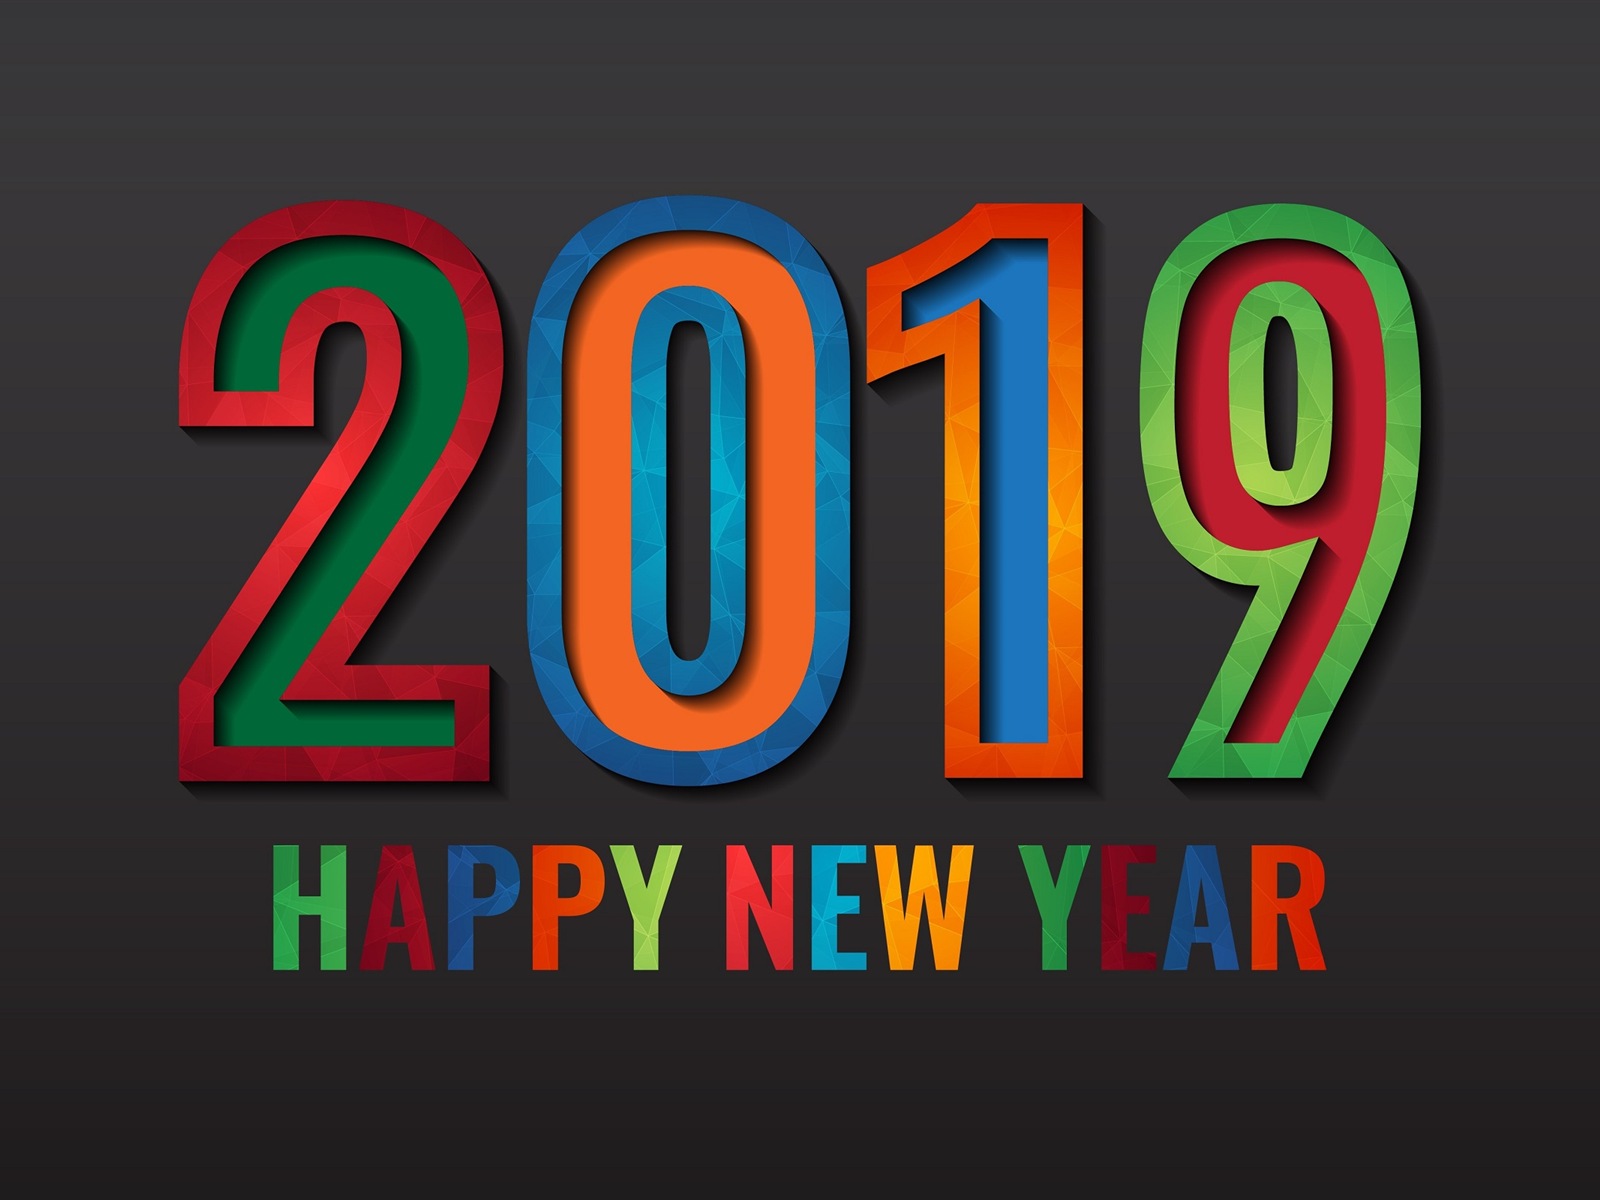 Happy New Year 2019 HD wallpapers #6 - 1600x1200